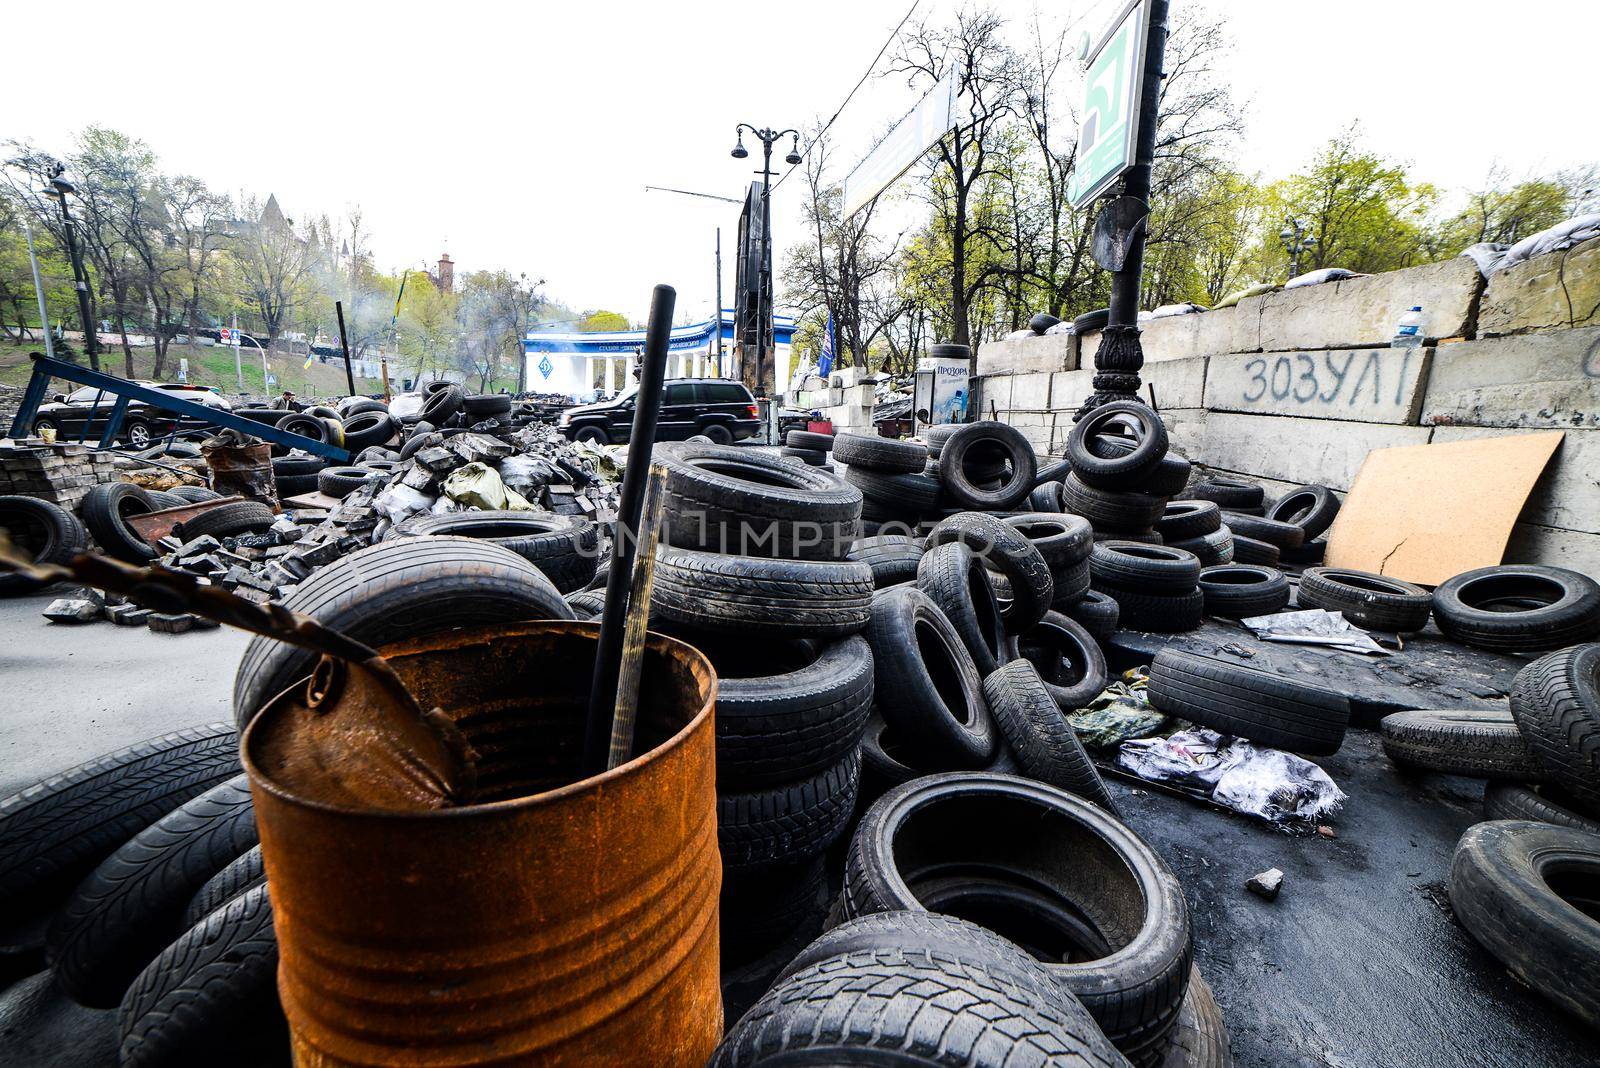 KIiev, Ukraine - April 14, 2014: Streets and barricades in the city center after the revolution in Kiev, Ukraine